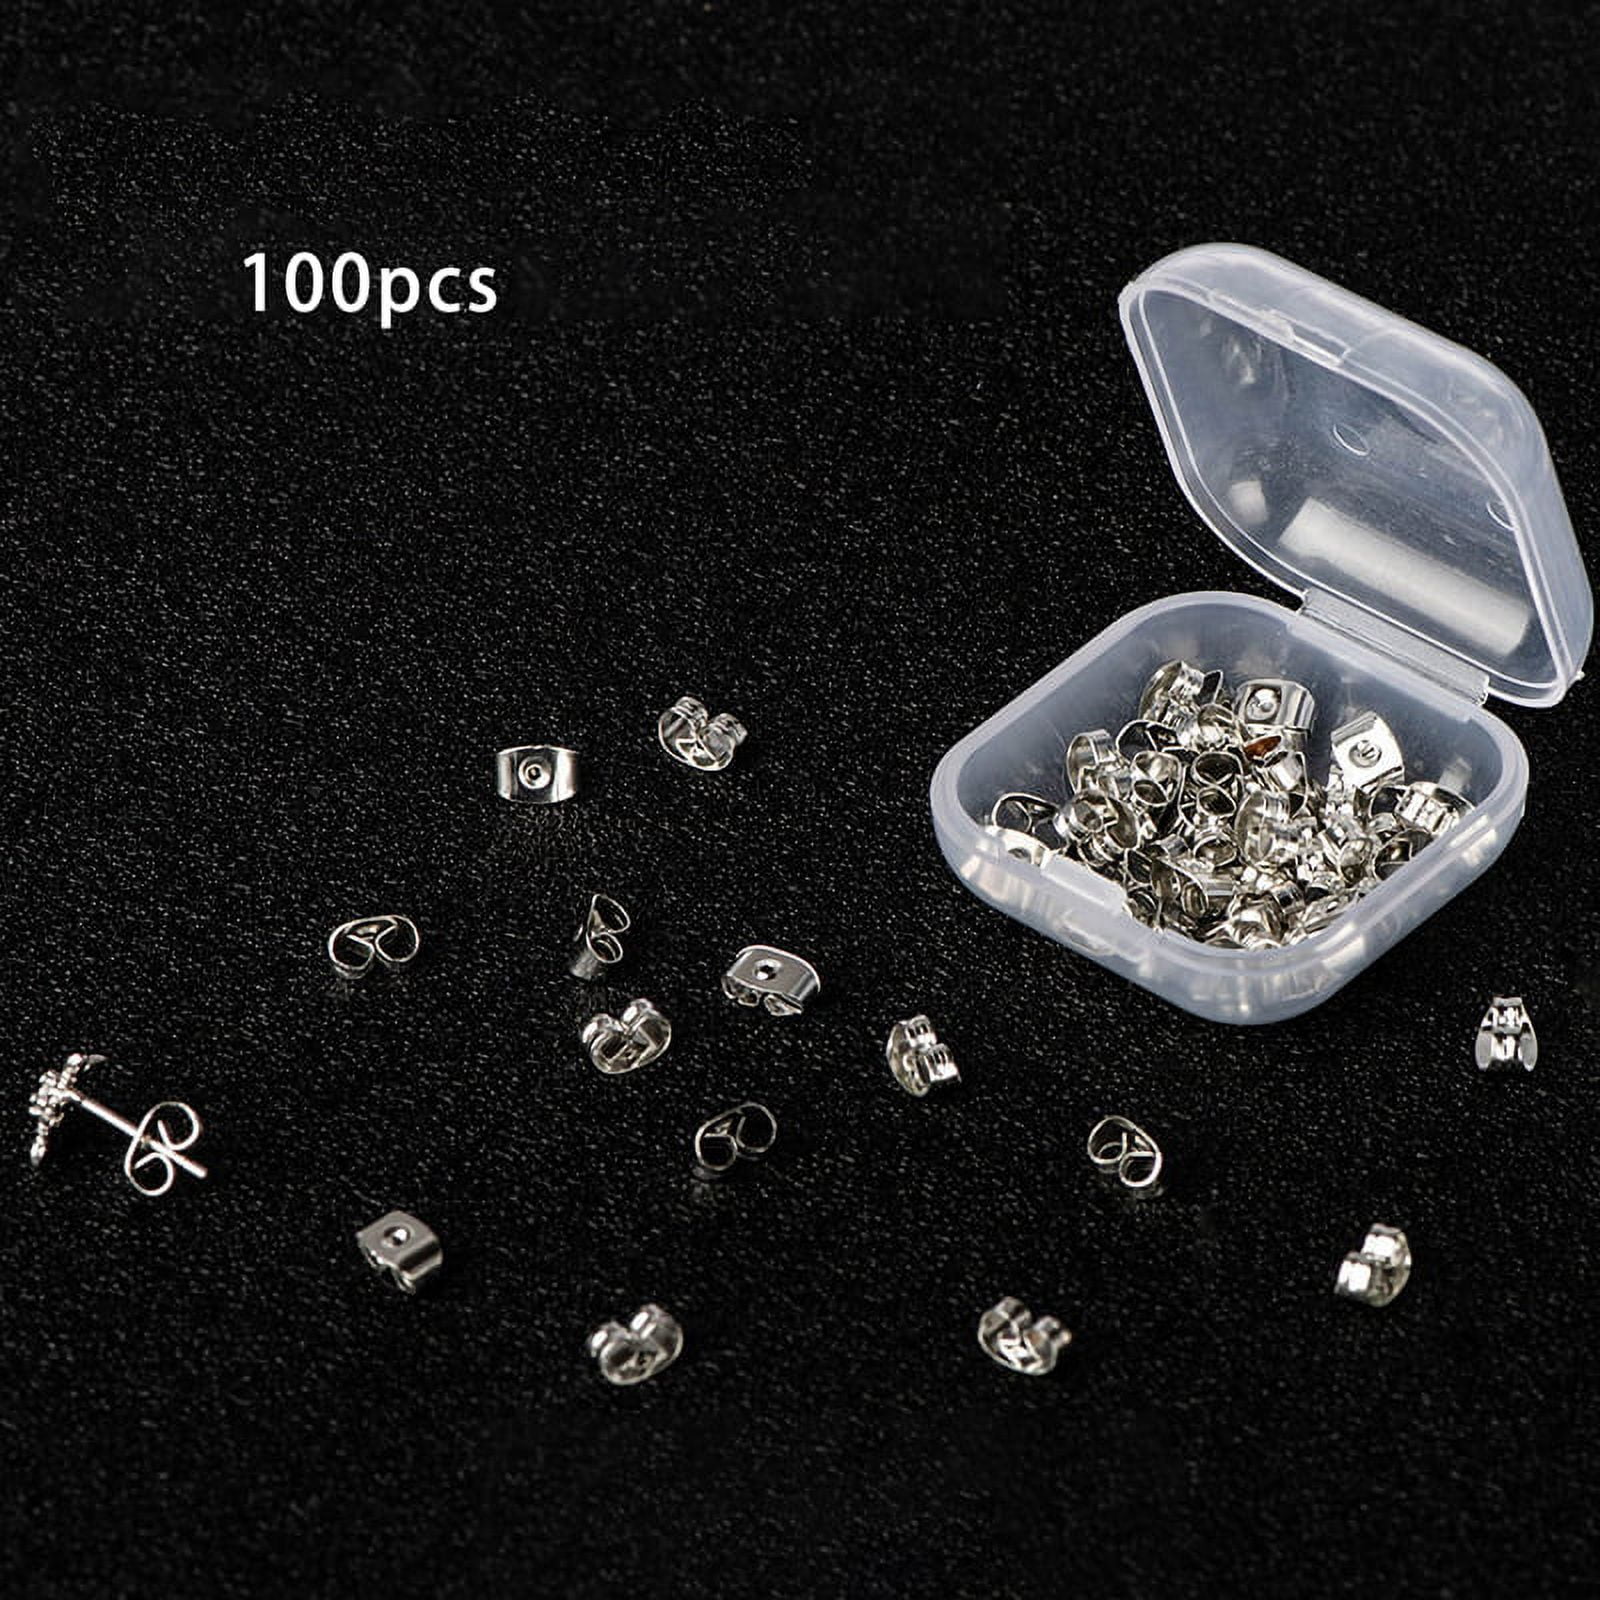 200 Pcs Plastic Earrings Posts for Sports Clear Plastic Earrings Studs for  Sensitive Ears Surgery DIY Supplies 